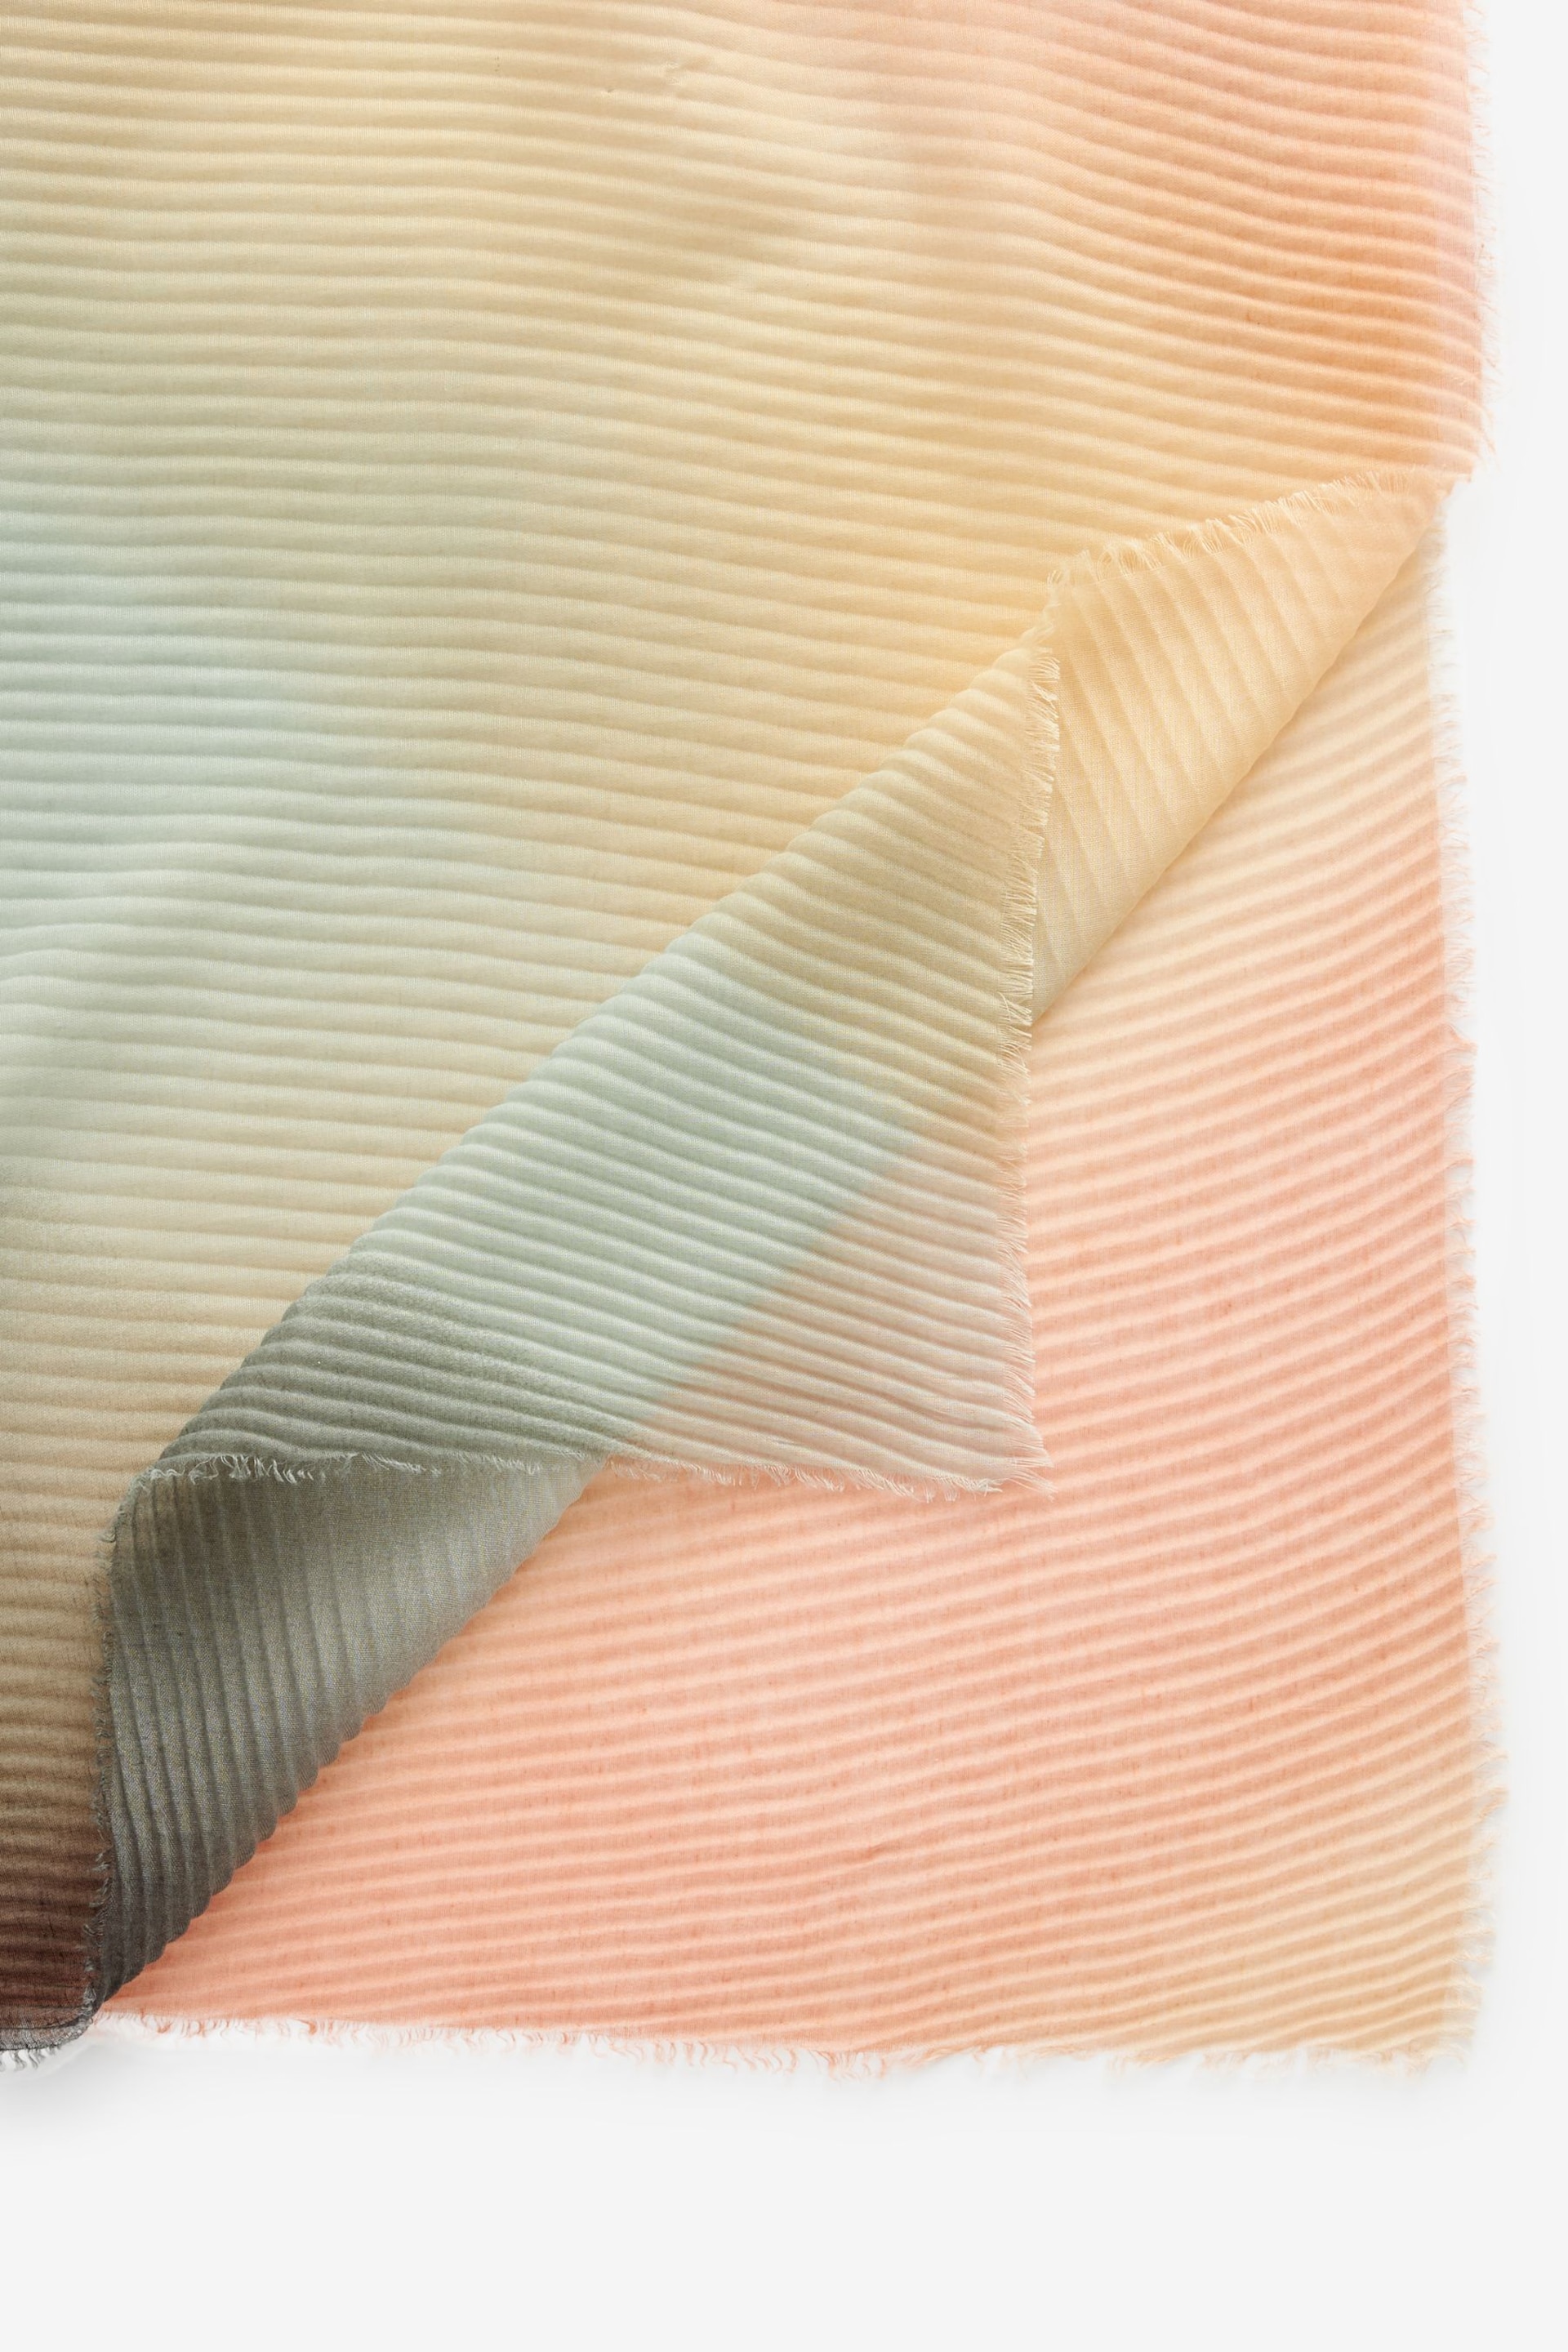 Nude Ombre Plisse Lightweight Scarf - Image 5 of 5